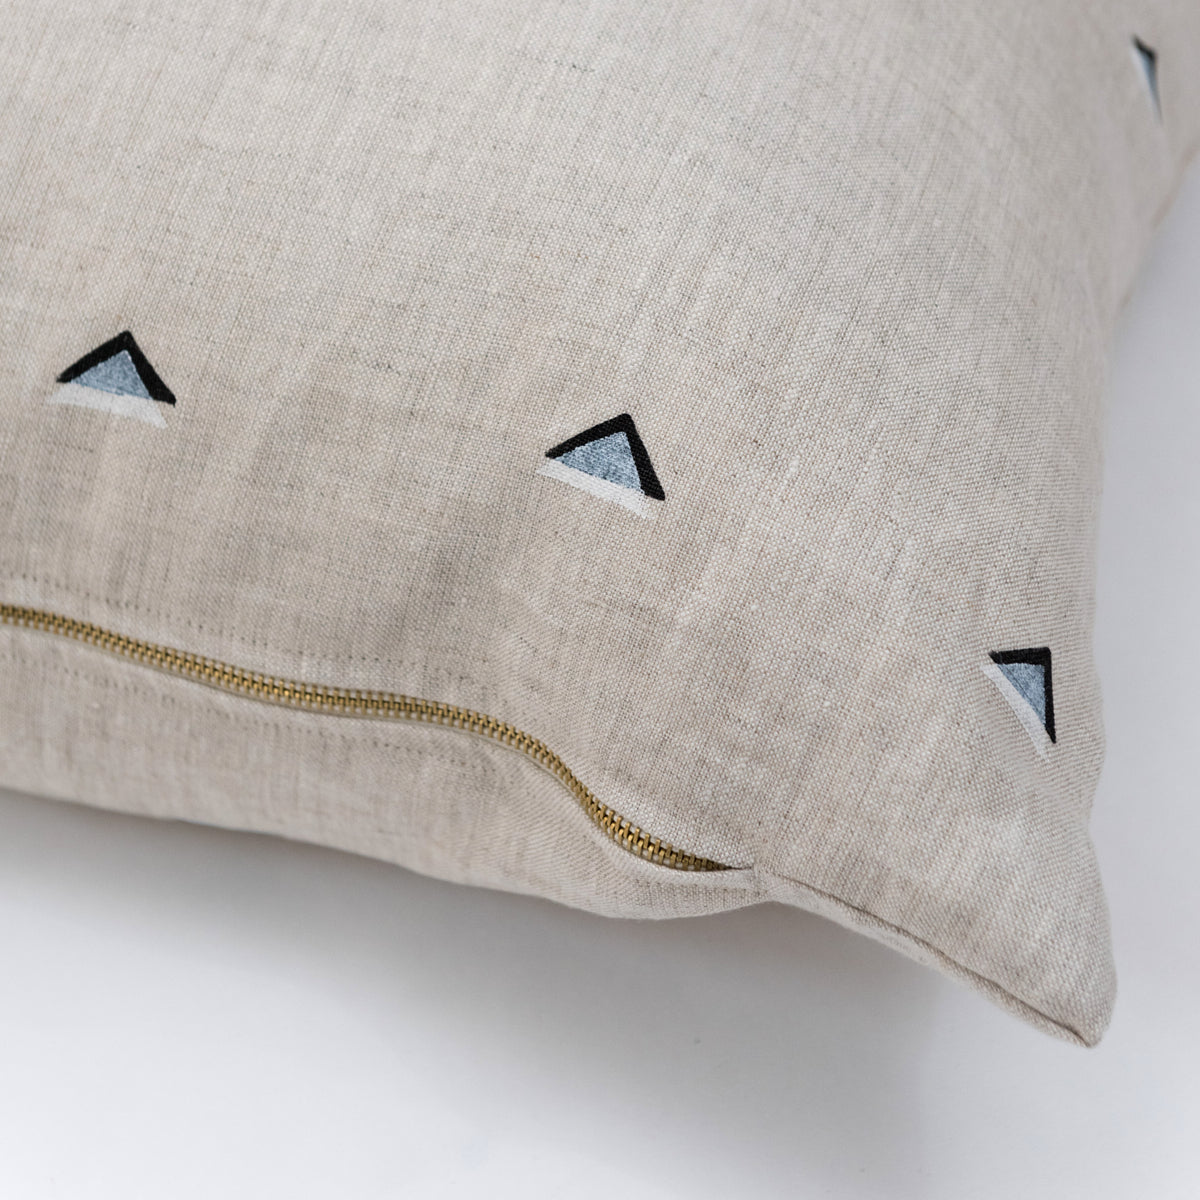 Overlapping Triangles Pillow | Black & White